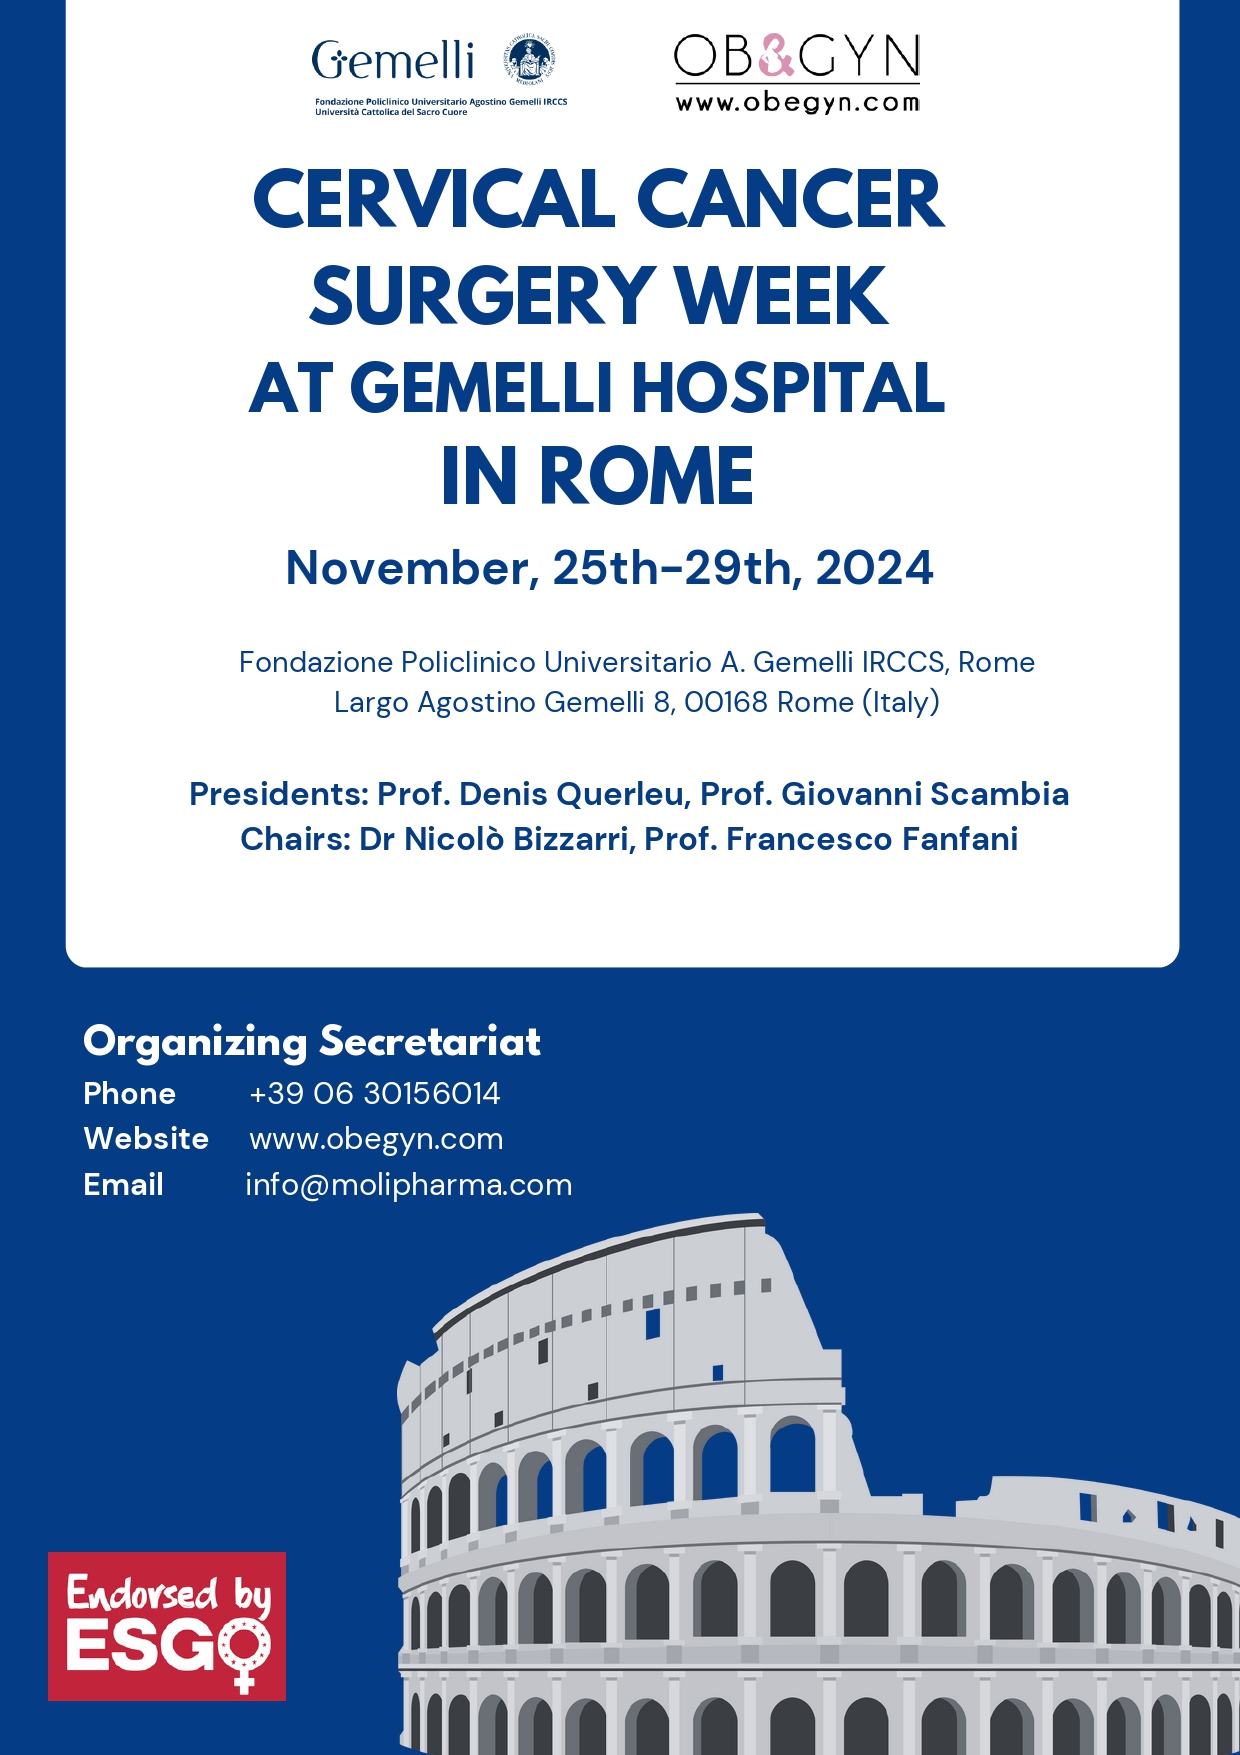 Programma CERVICAL CANCER SURGERY WEEK AT GEMELLI HOSPITAL IN ROME  